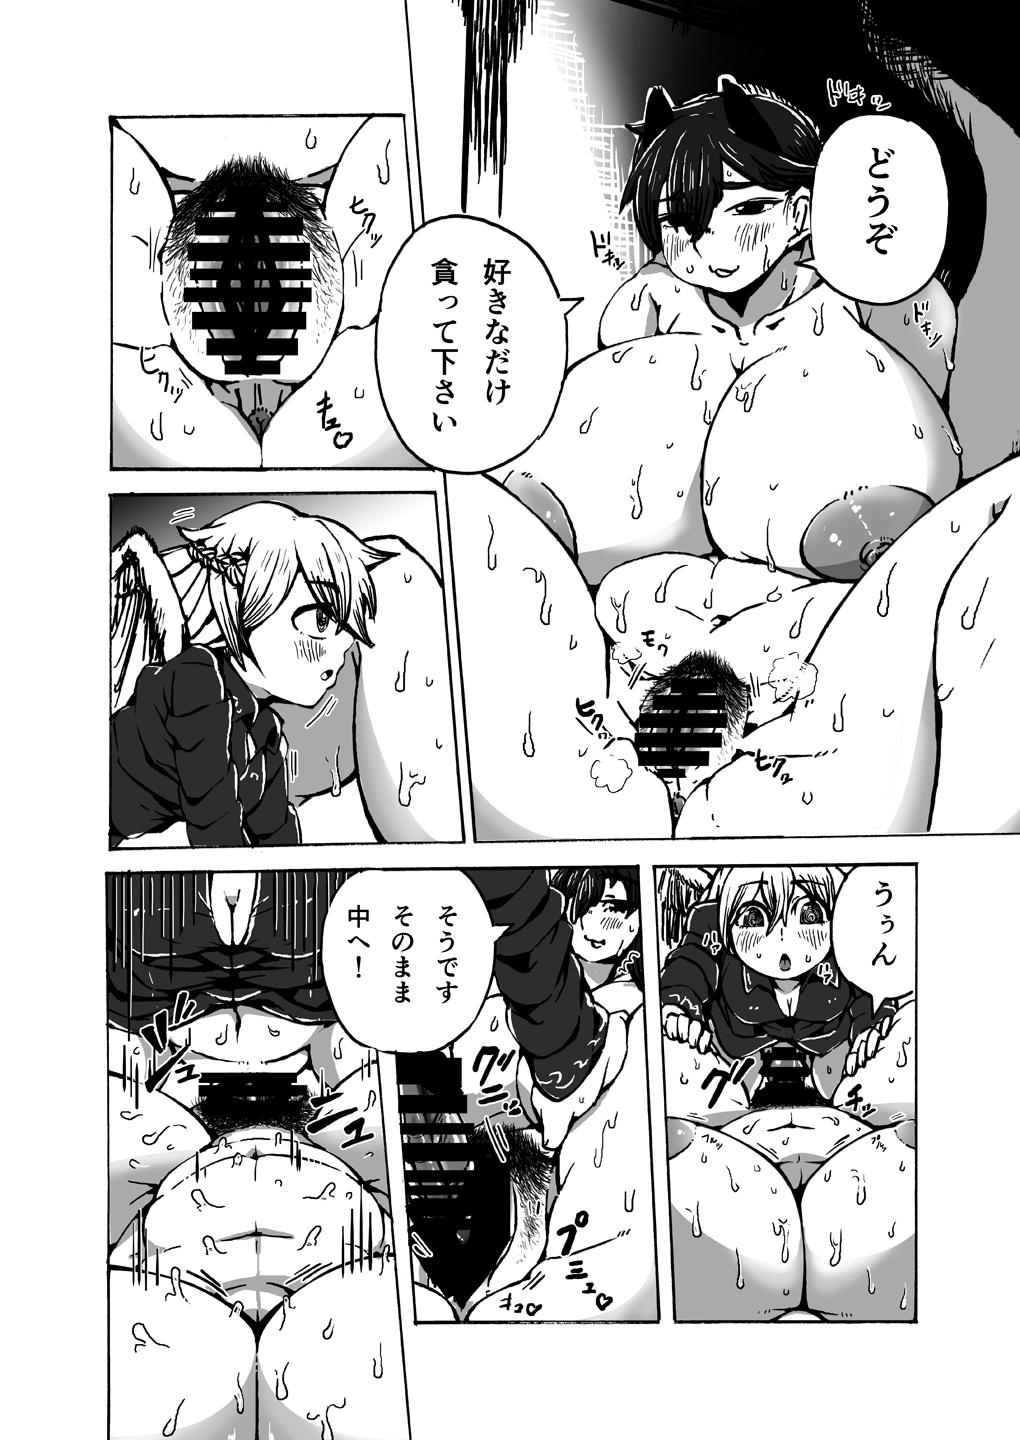 Stepmom キモチがいいのも一度きり。 - Touhou project Belly - Page 16